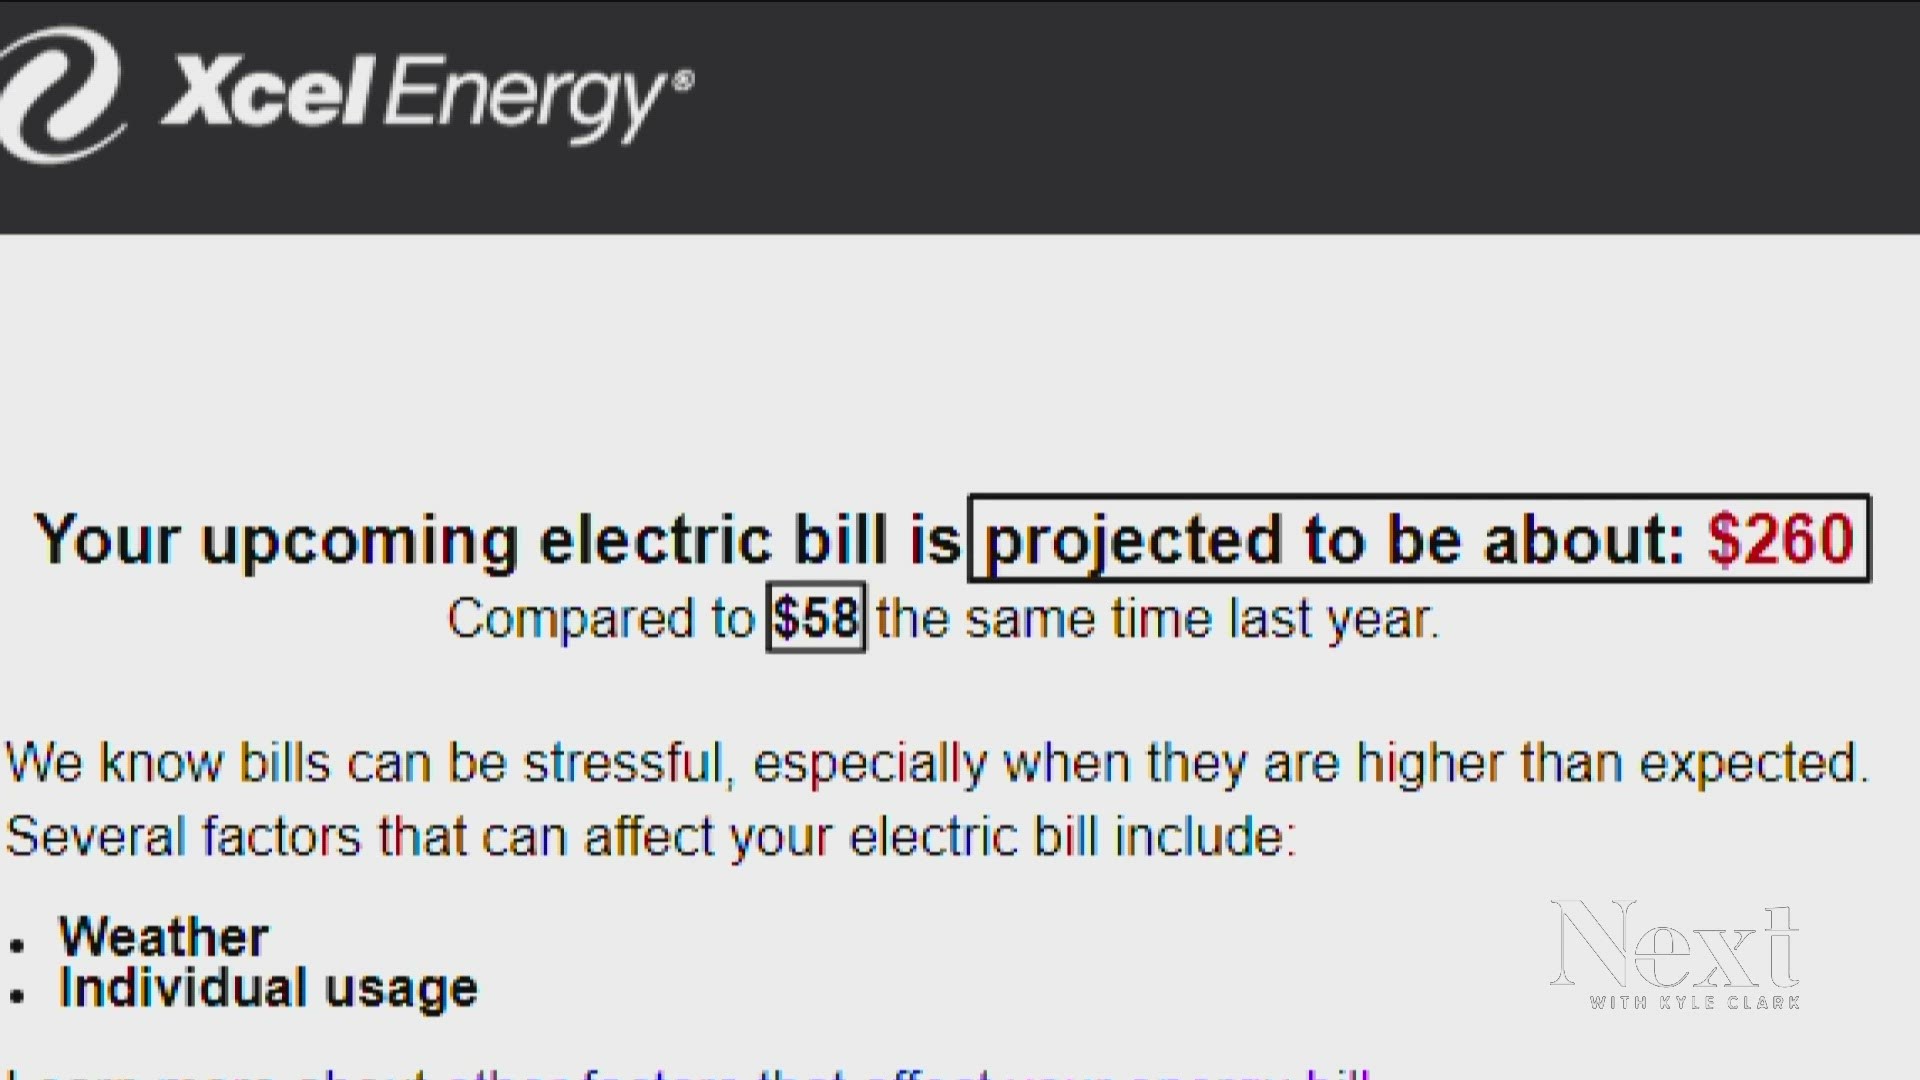 Despite Colorado's cool temperatures in May and June, Xcel Energy customers received email alerts that their electric bills increased more than 300% over a year.